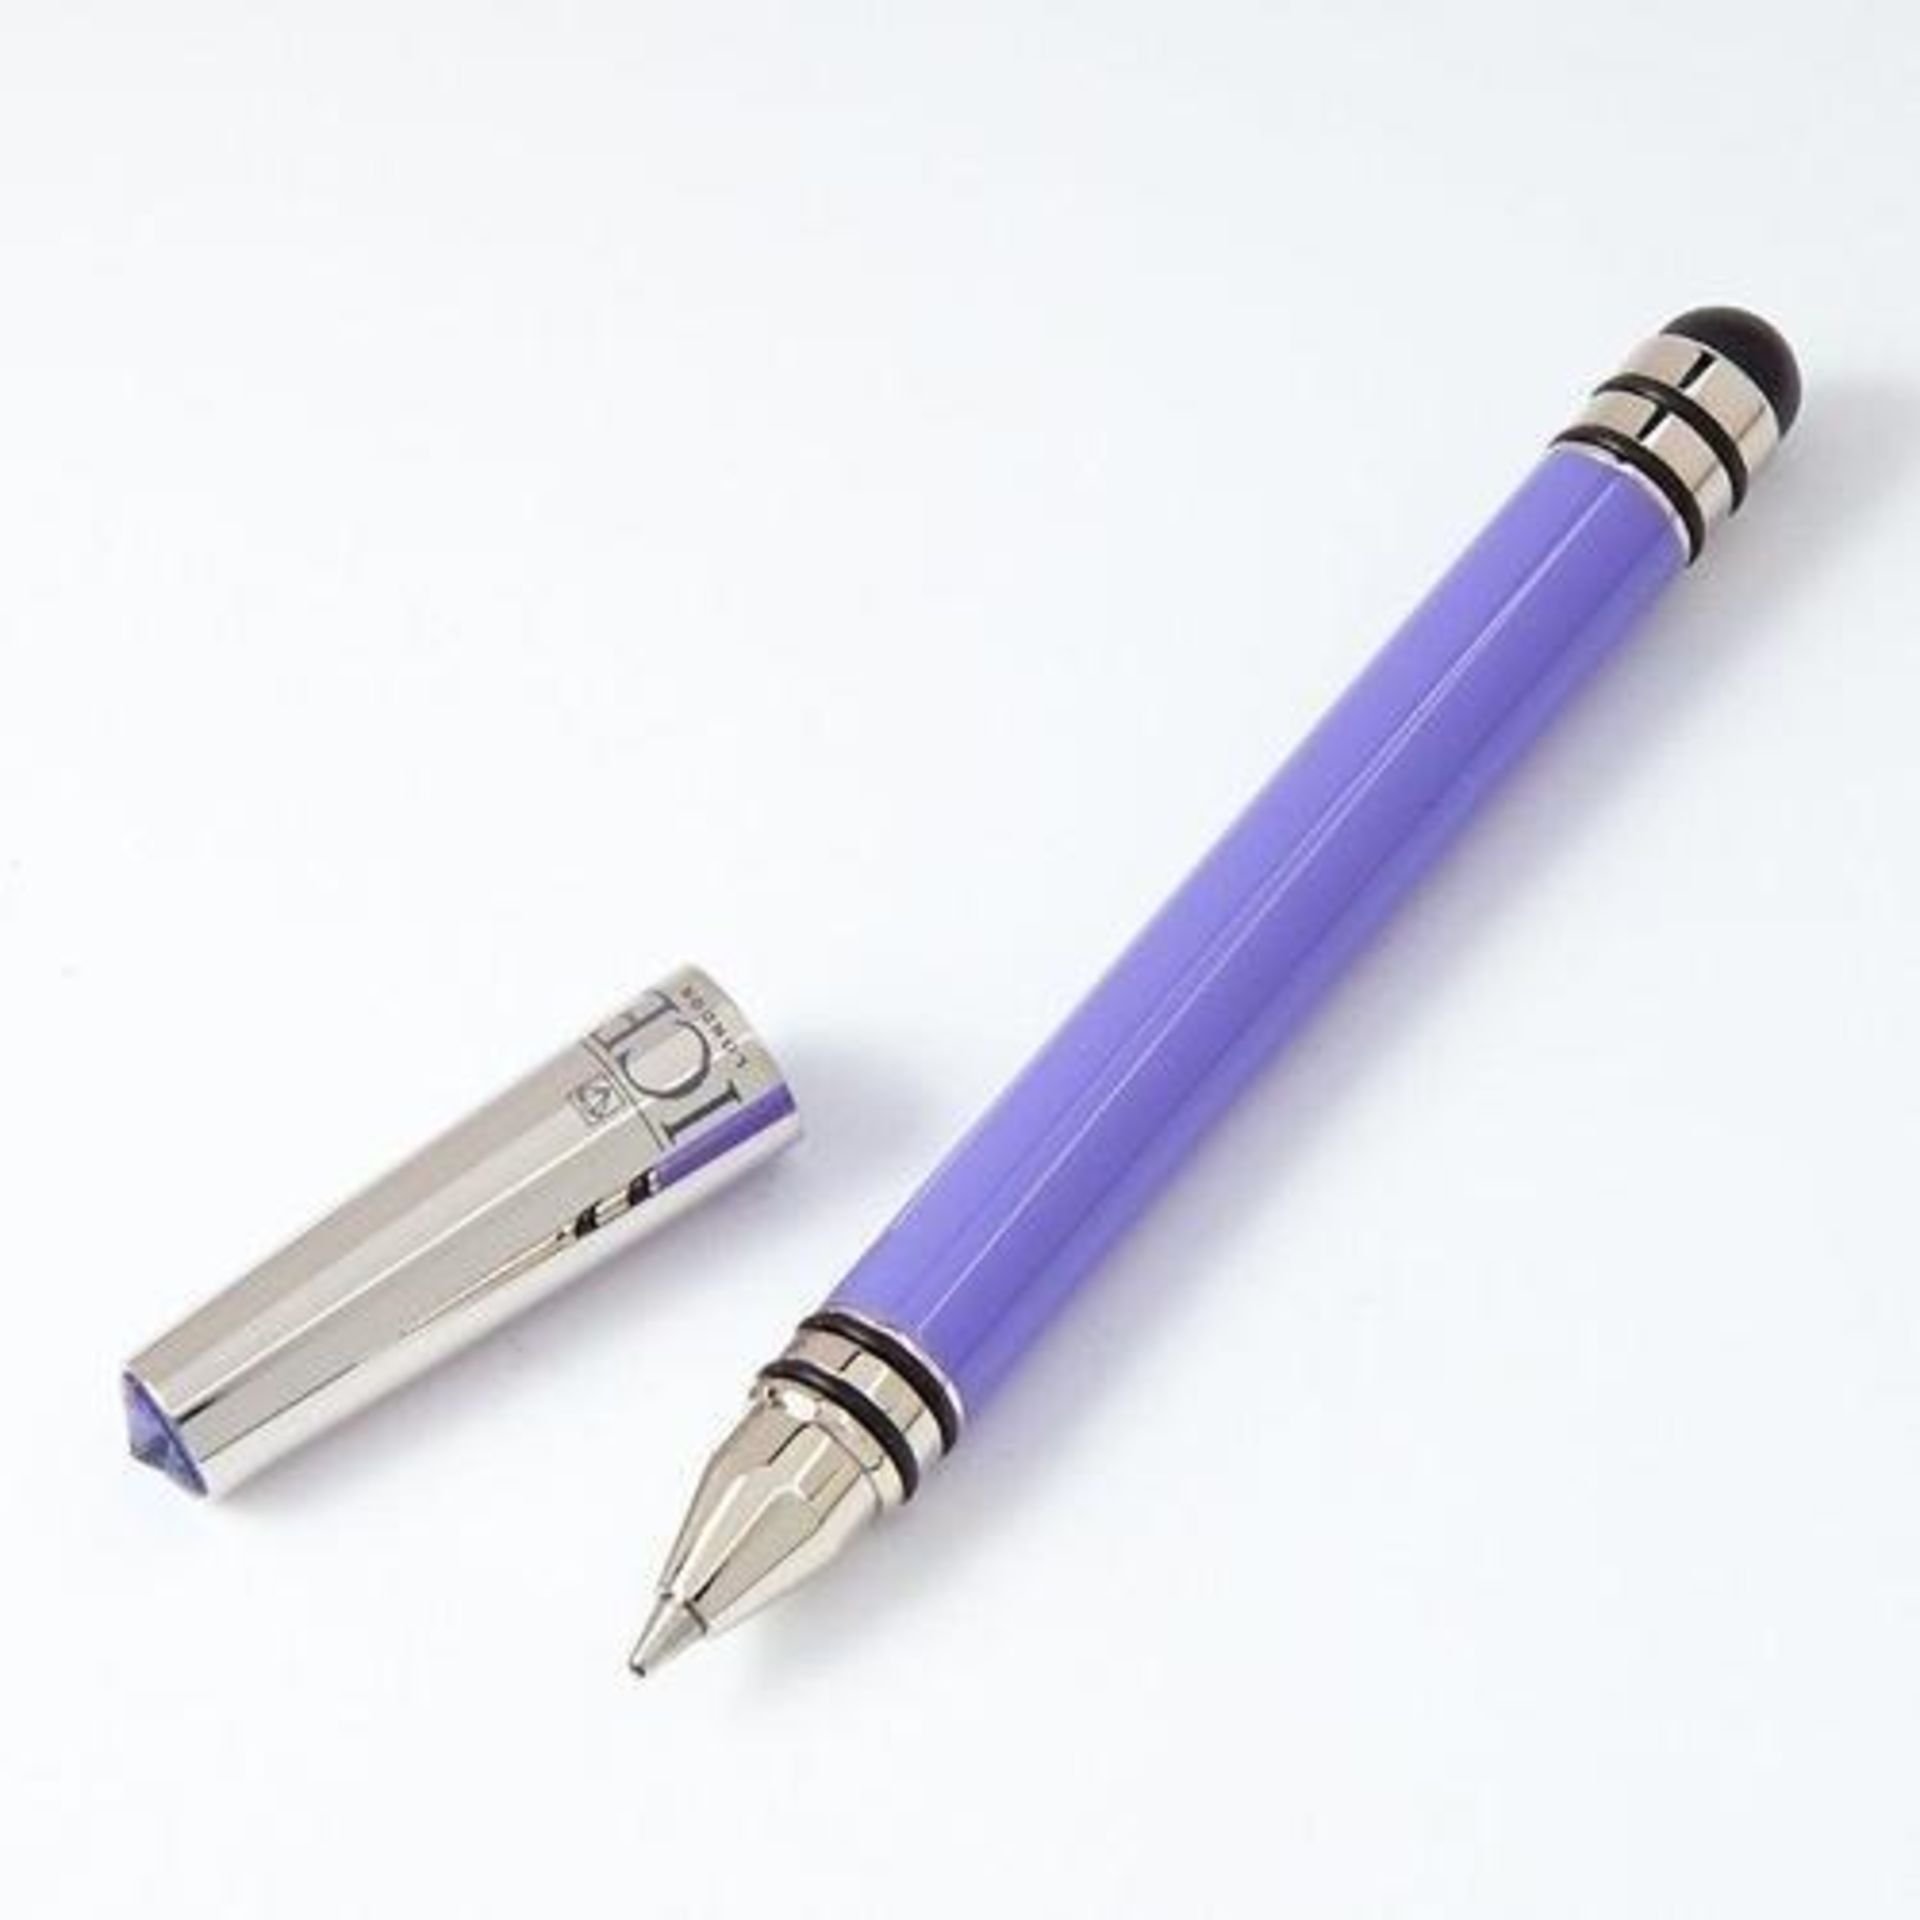 40 x ICE LONDON App Pen Duo - Touch Stylus And Ink Pen Combined - Colour: PURPLE - MADE WITH - Image 4 of 5